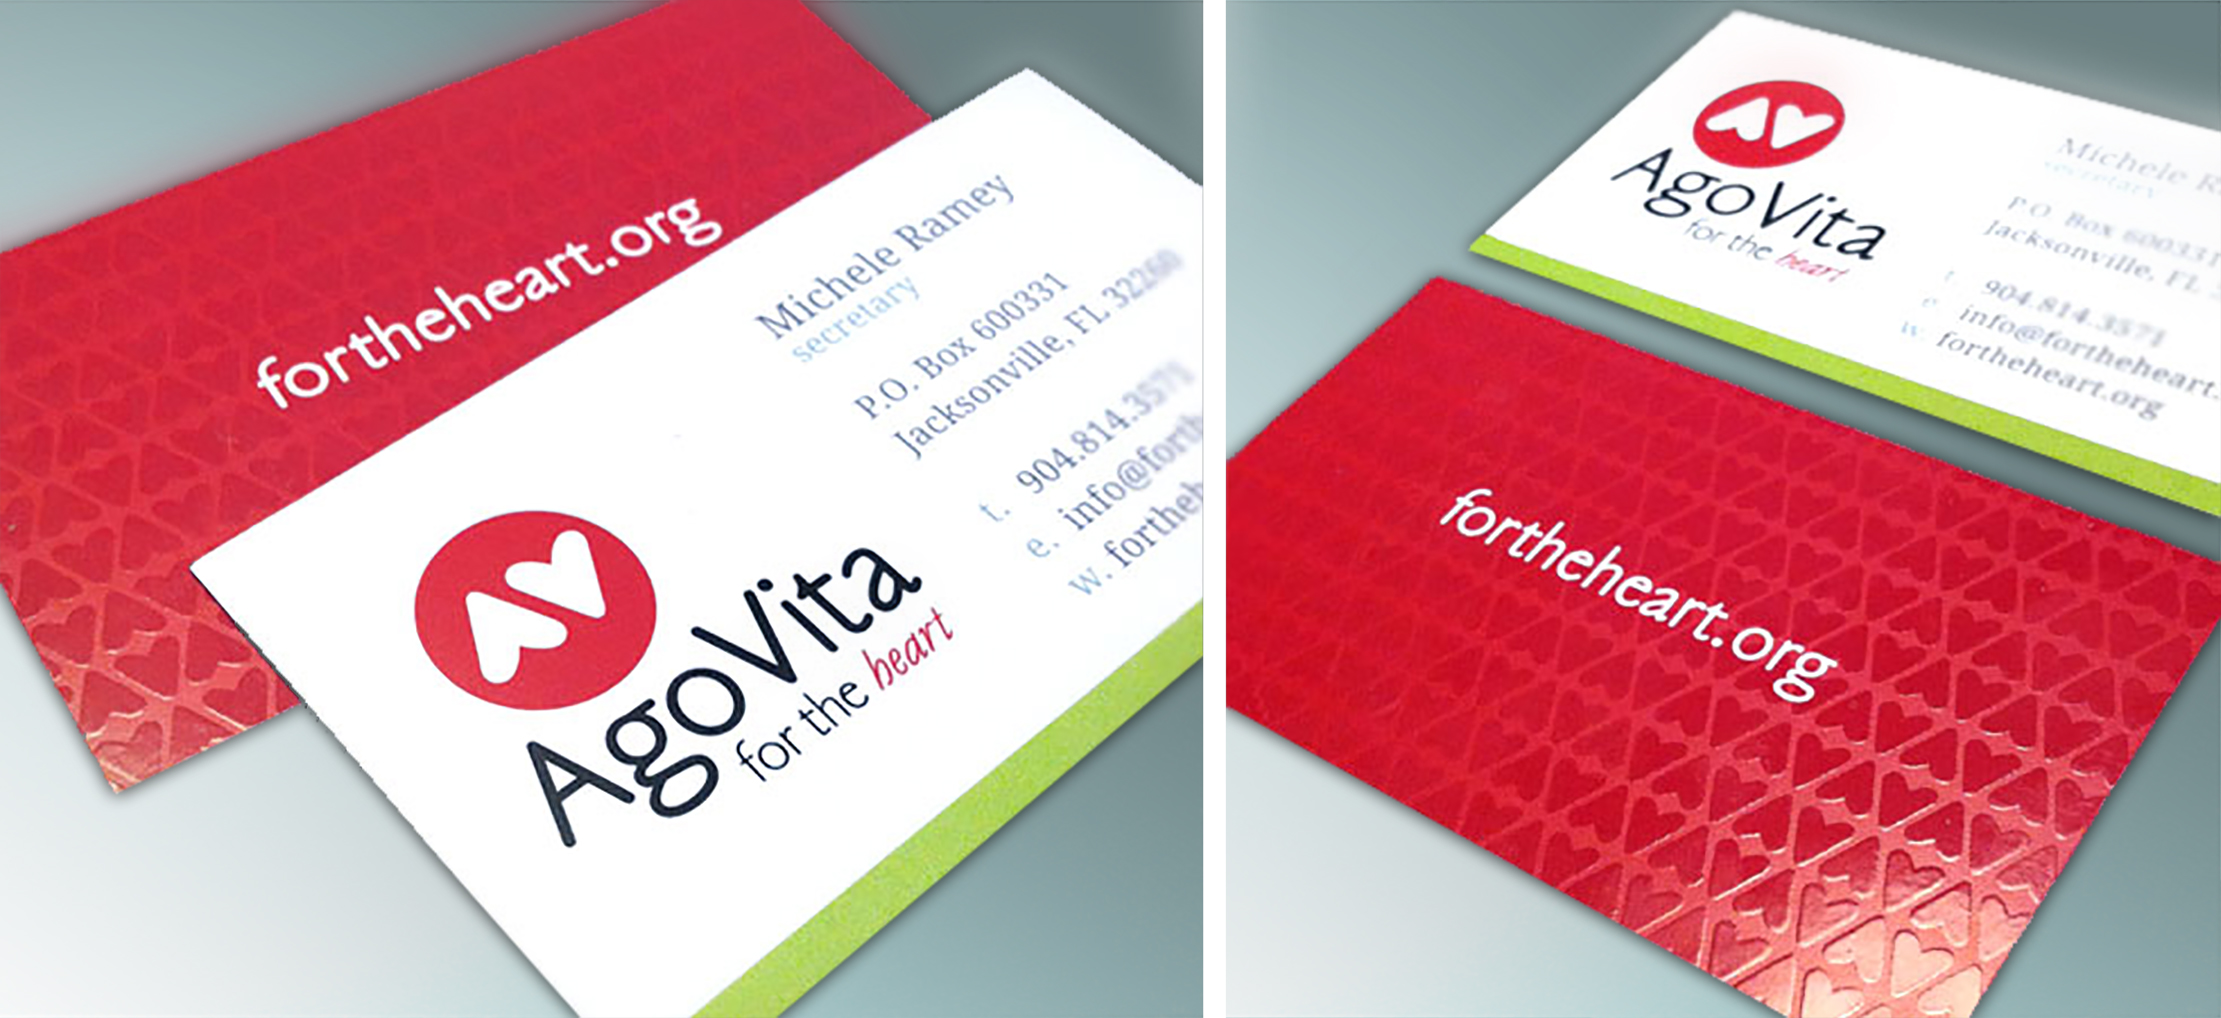 Ago Vita Business Card Design by Just Make Things